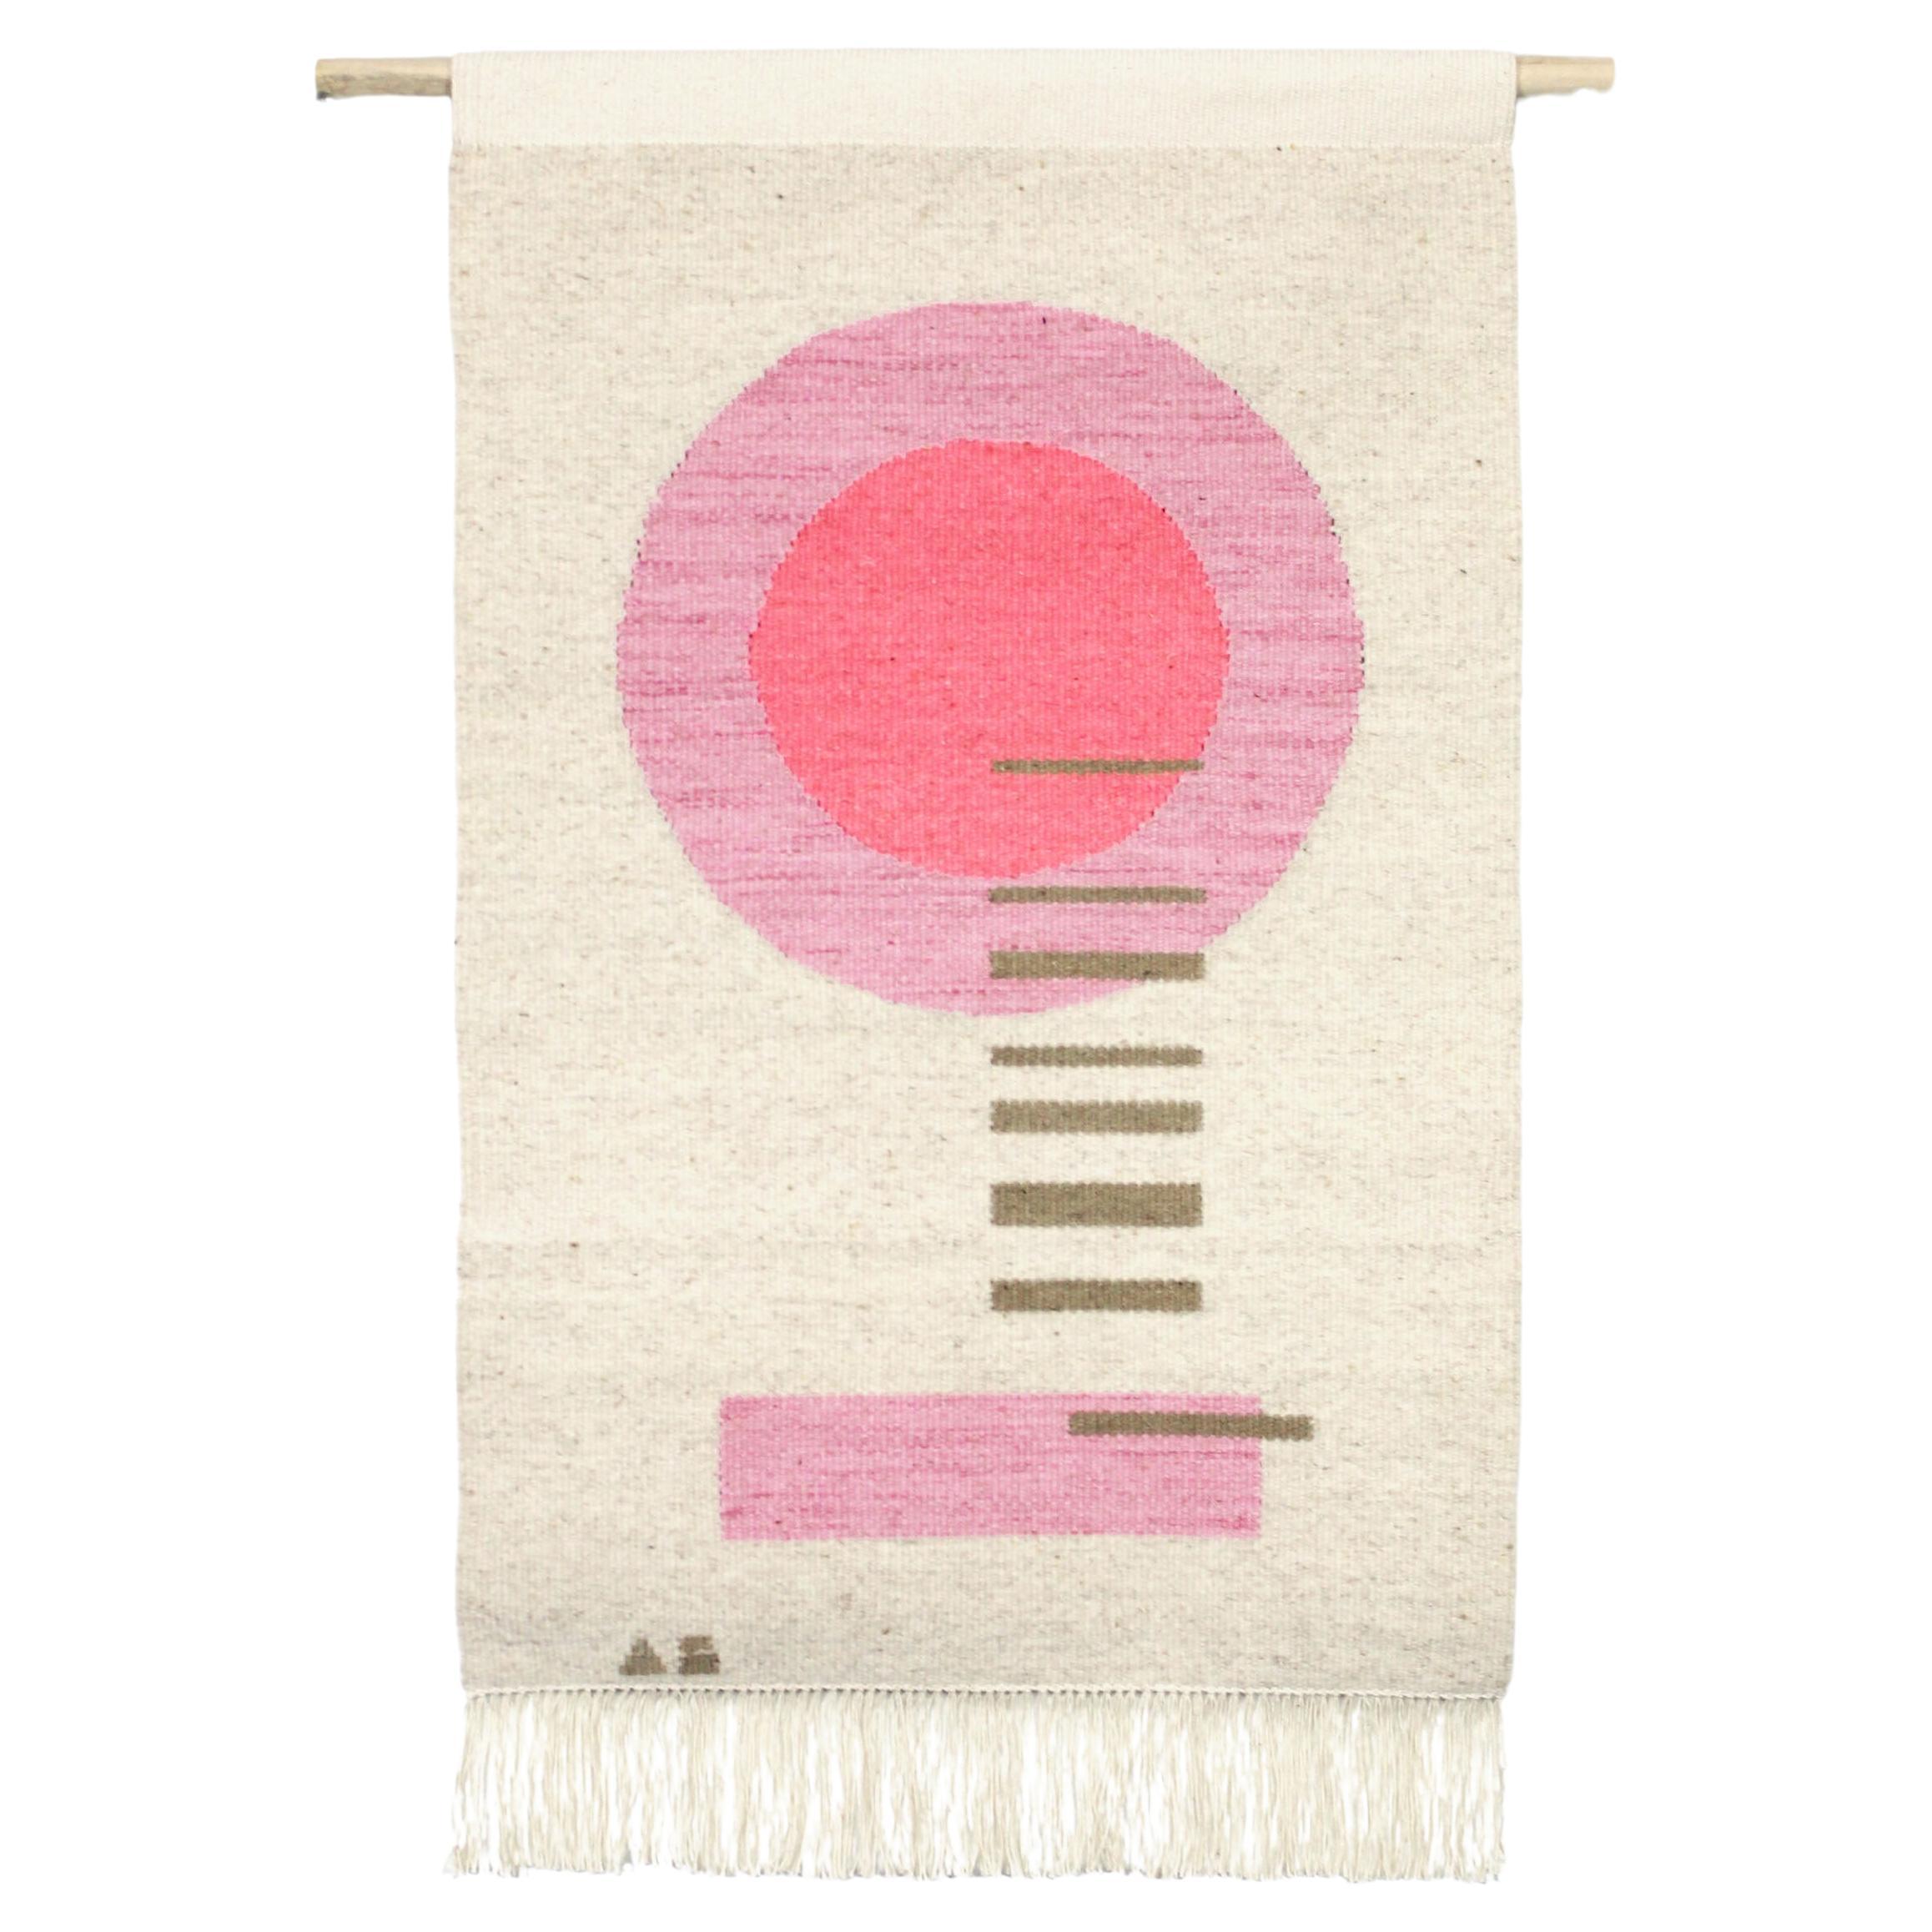 Textile Poster, Contemporary Handwoven Tapestry by Andrew Boos For Sale